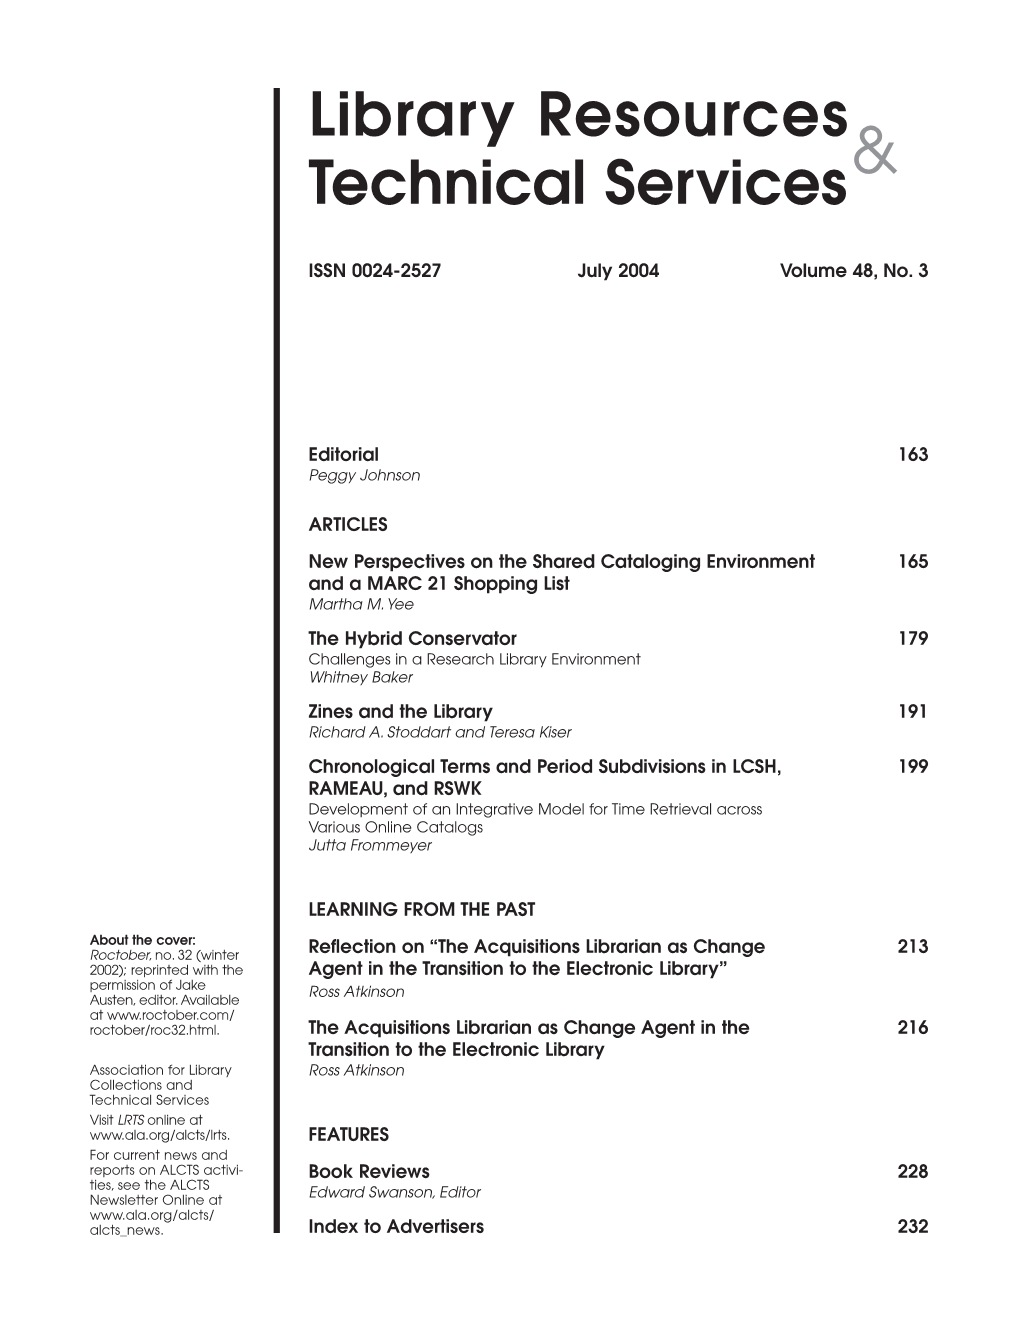 Library Resources Technical Services&